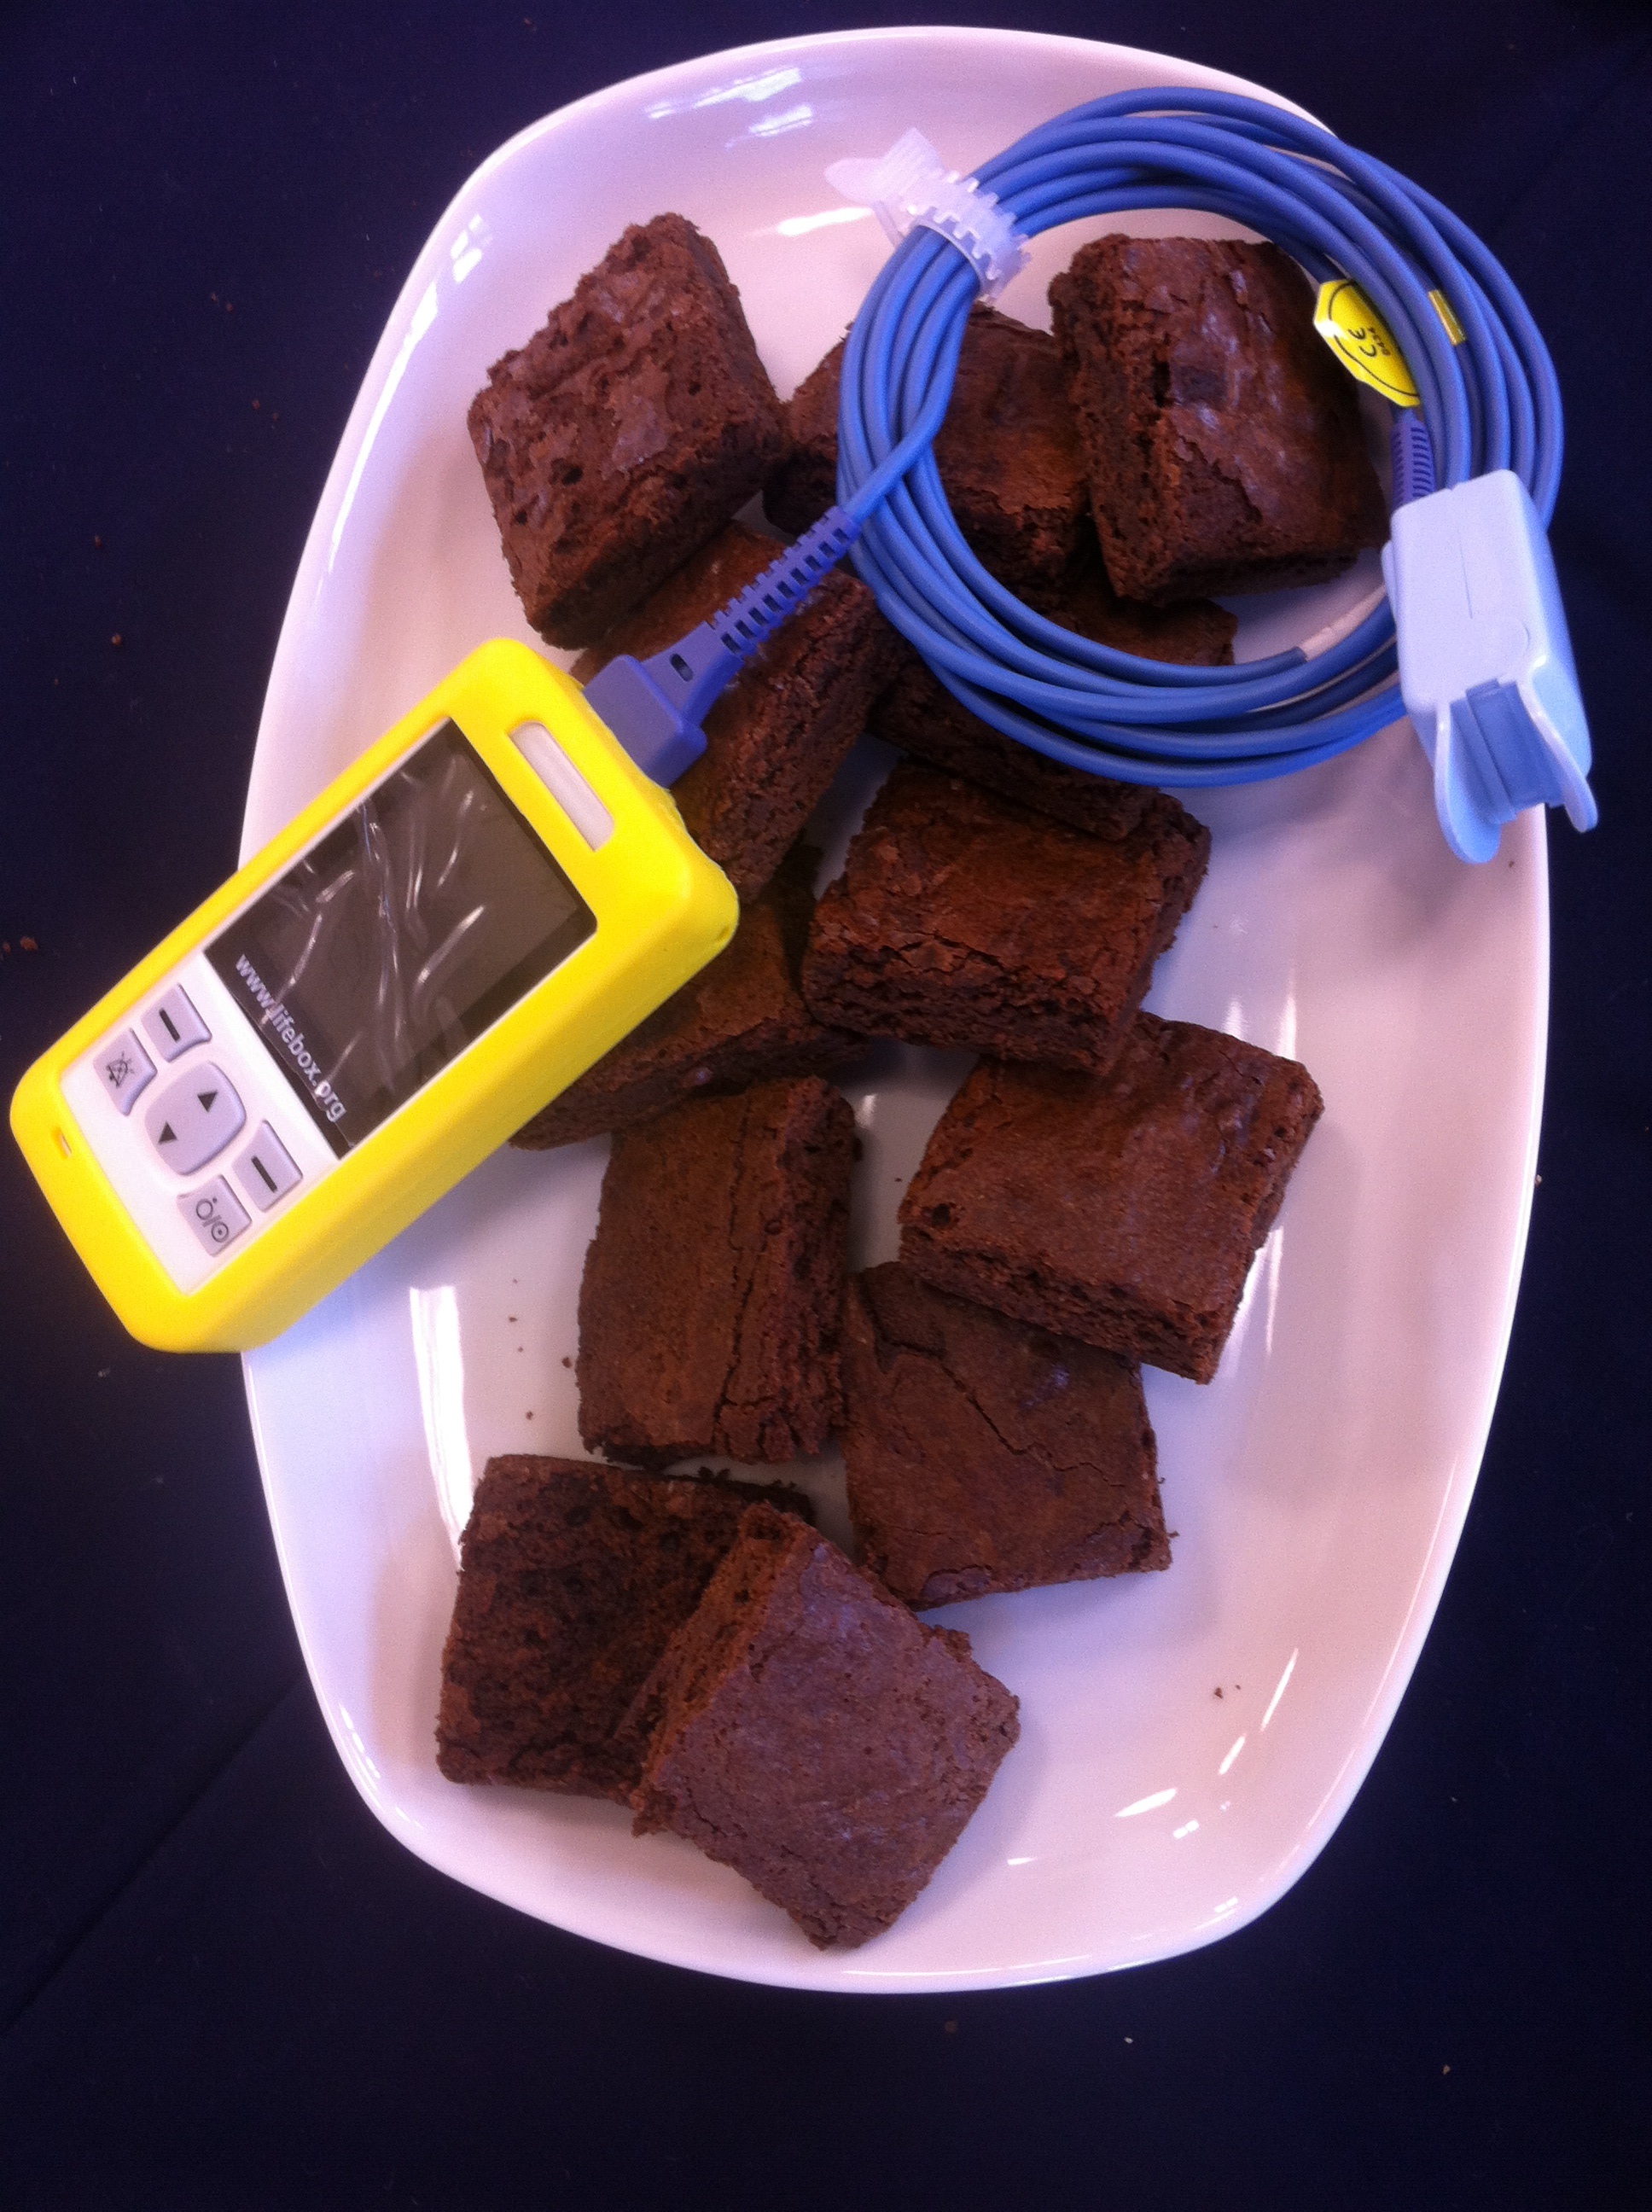 Oximeter and brownies